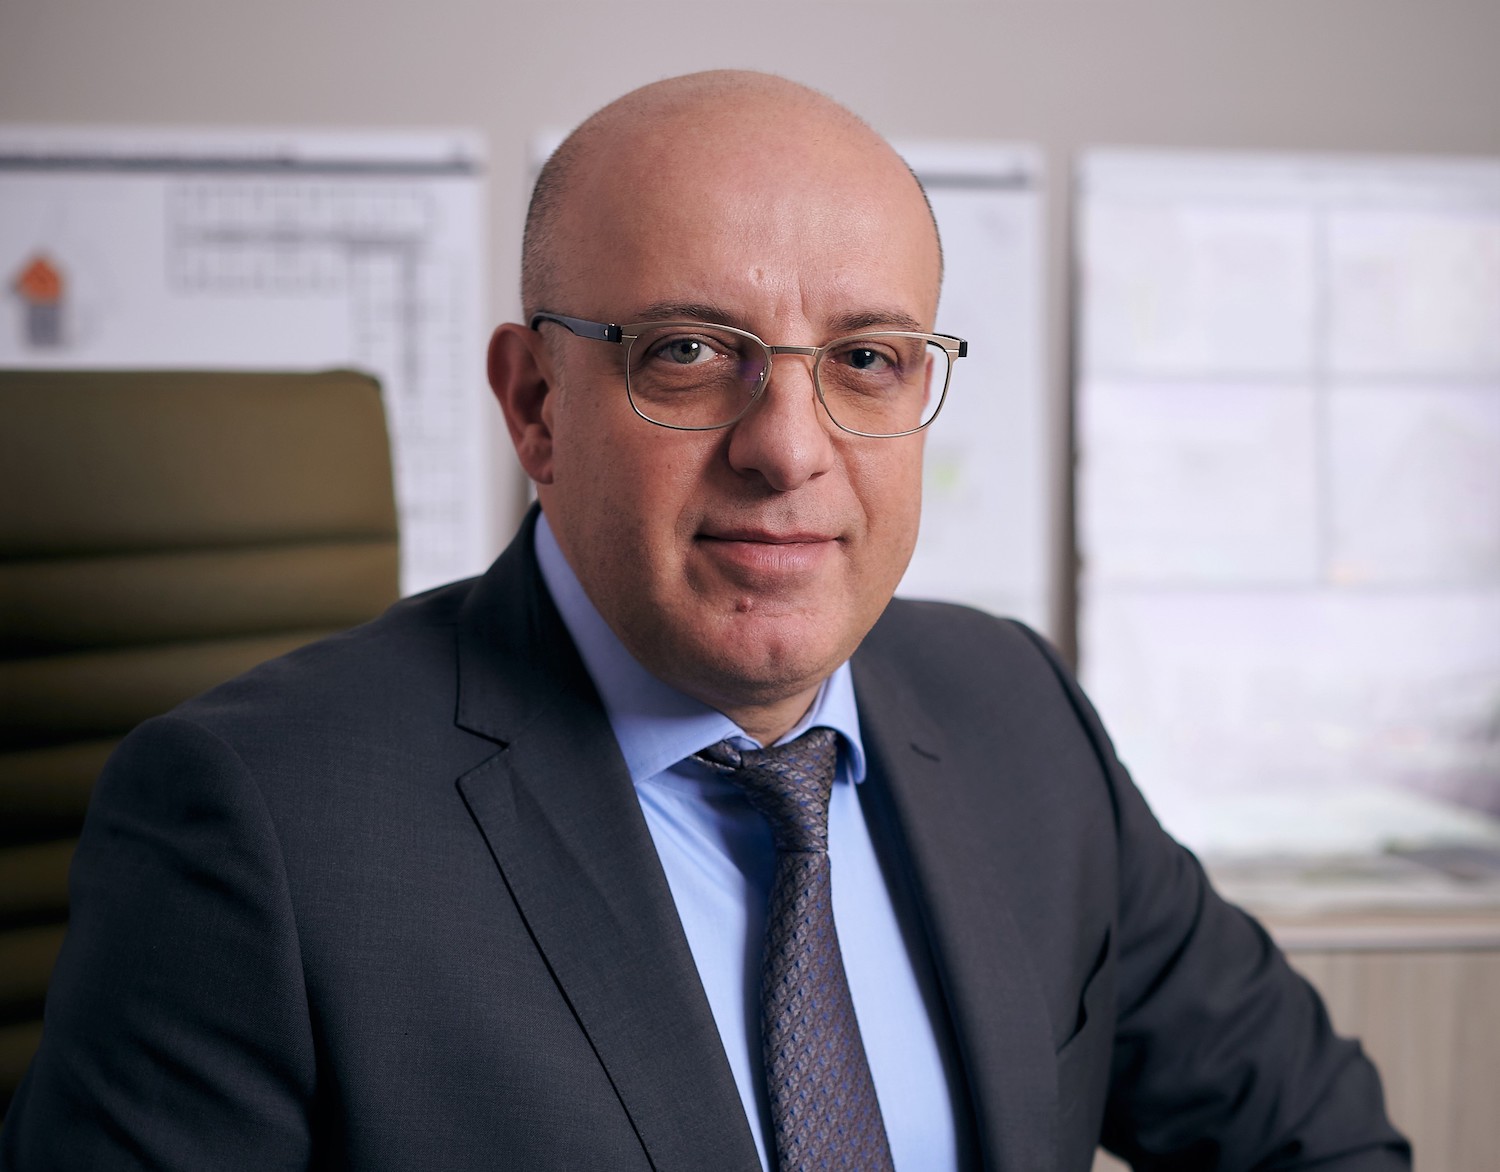 Claudiu Doroș, President EVERGENT Investments: Our financial performance reflects a carefully built strategic investment approach